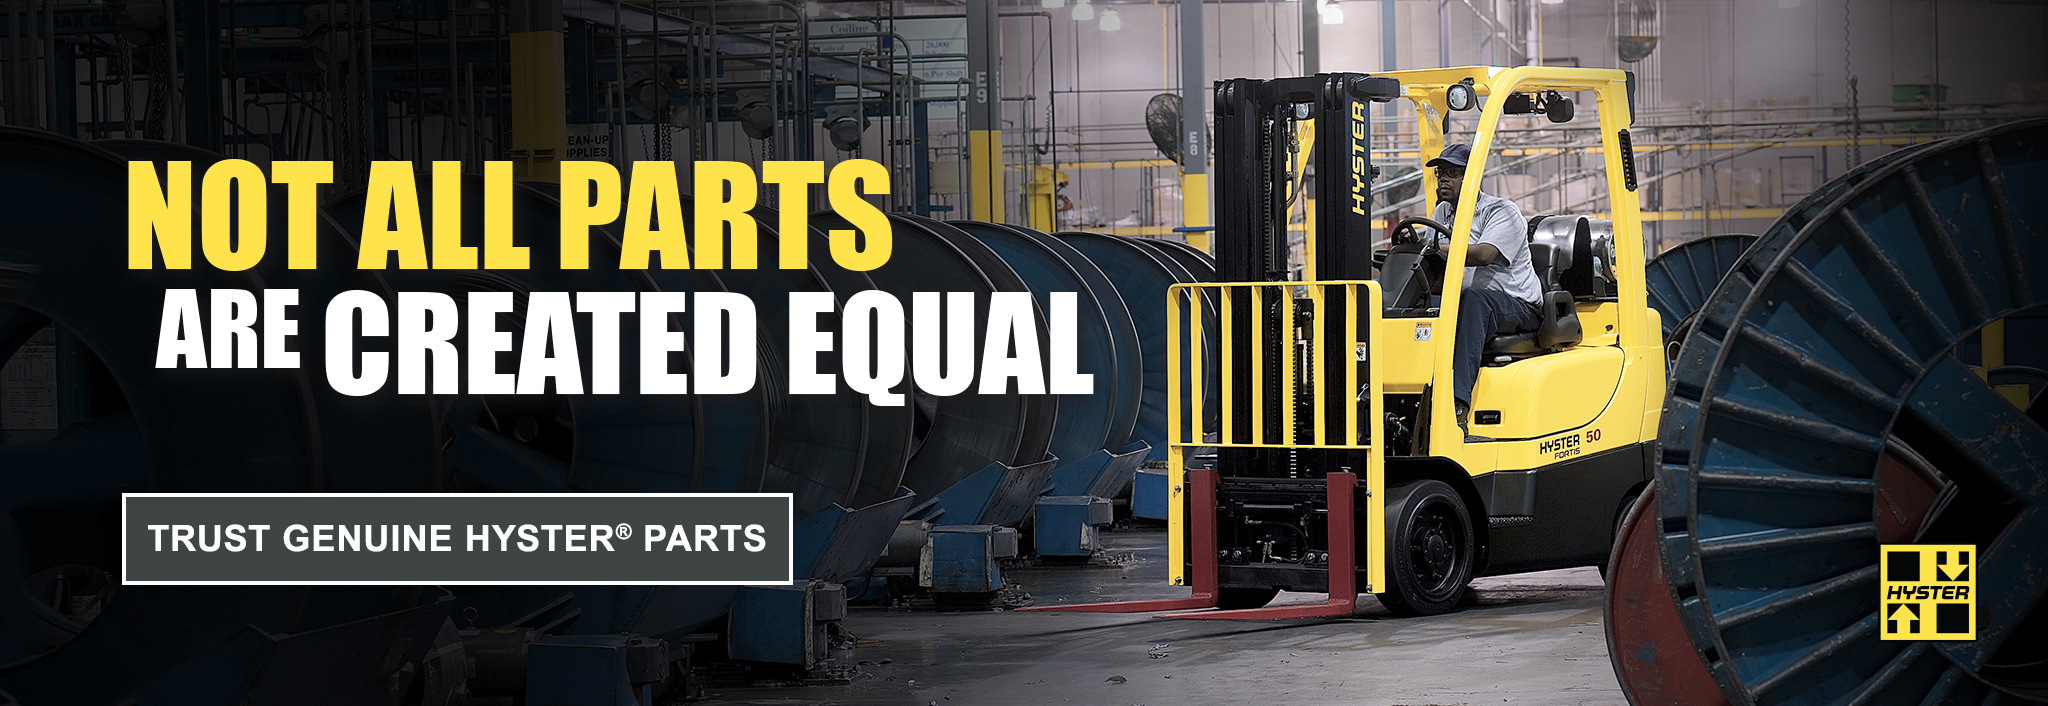 Not All Parts are Created Equal Hyster Image